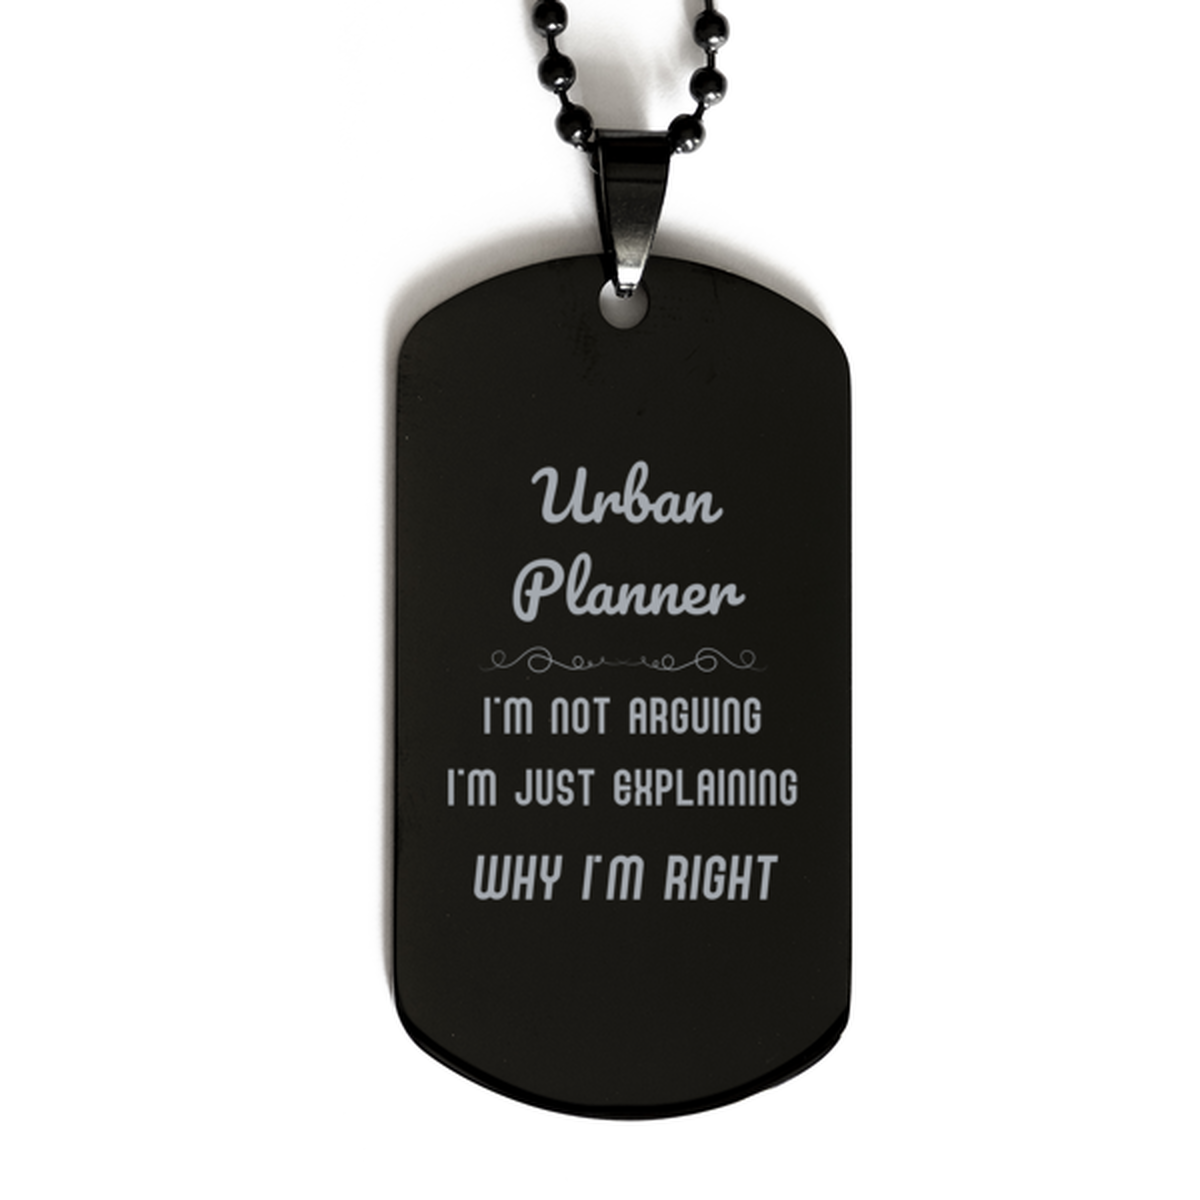 Urban Planner I'm not Arguing. I'm Just Explaining Why I'm RIGHT Black Dog Tag, Funny Saying Quote Urban Planner Gifts For Urban Planner Graduation Birthday Christmas Gifts for Men Women Coworker